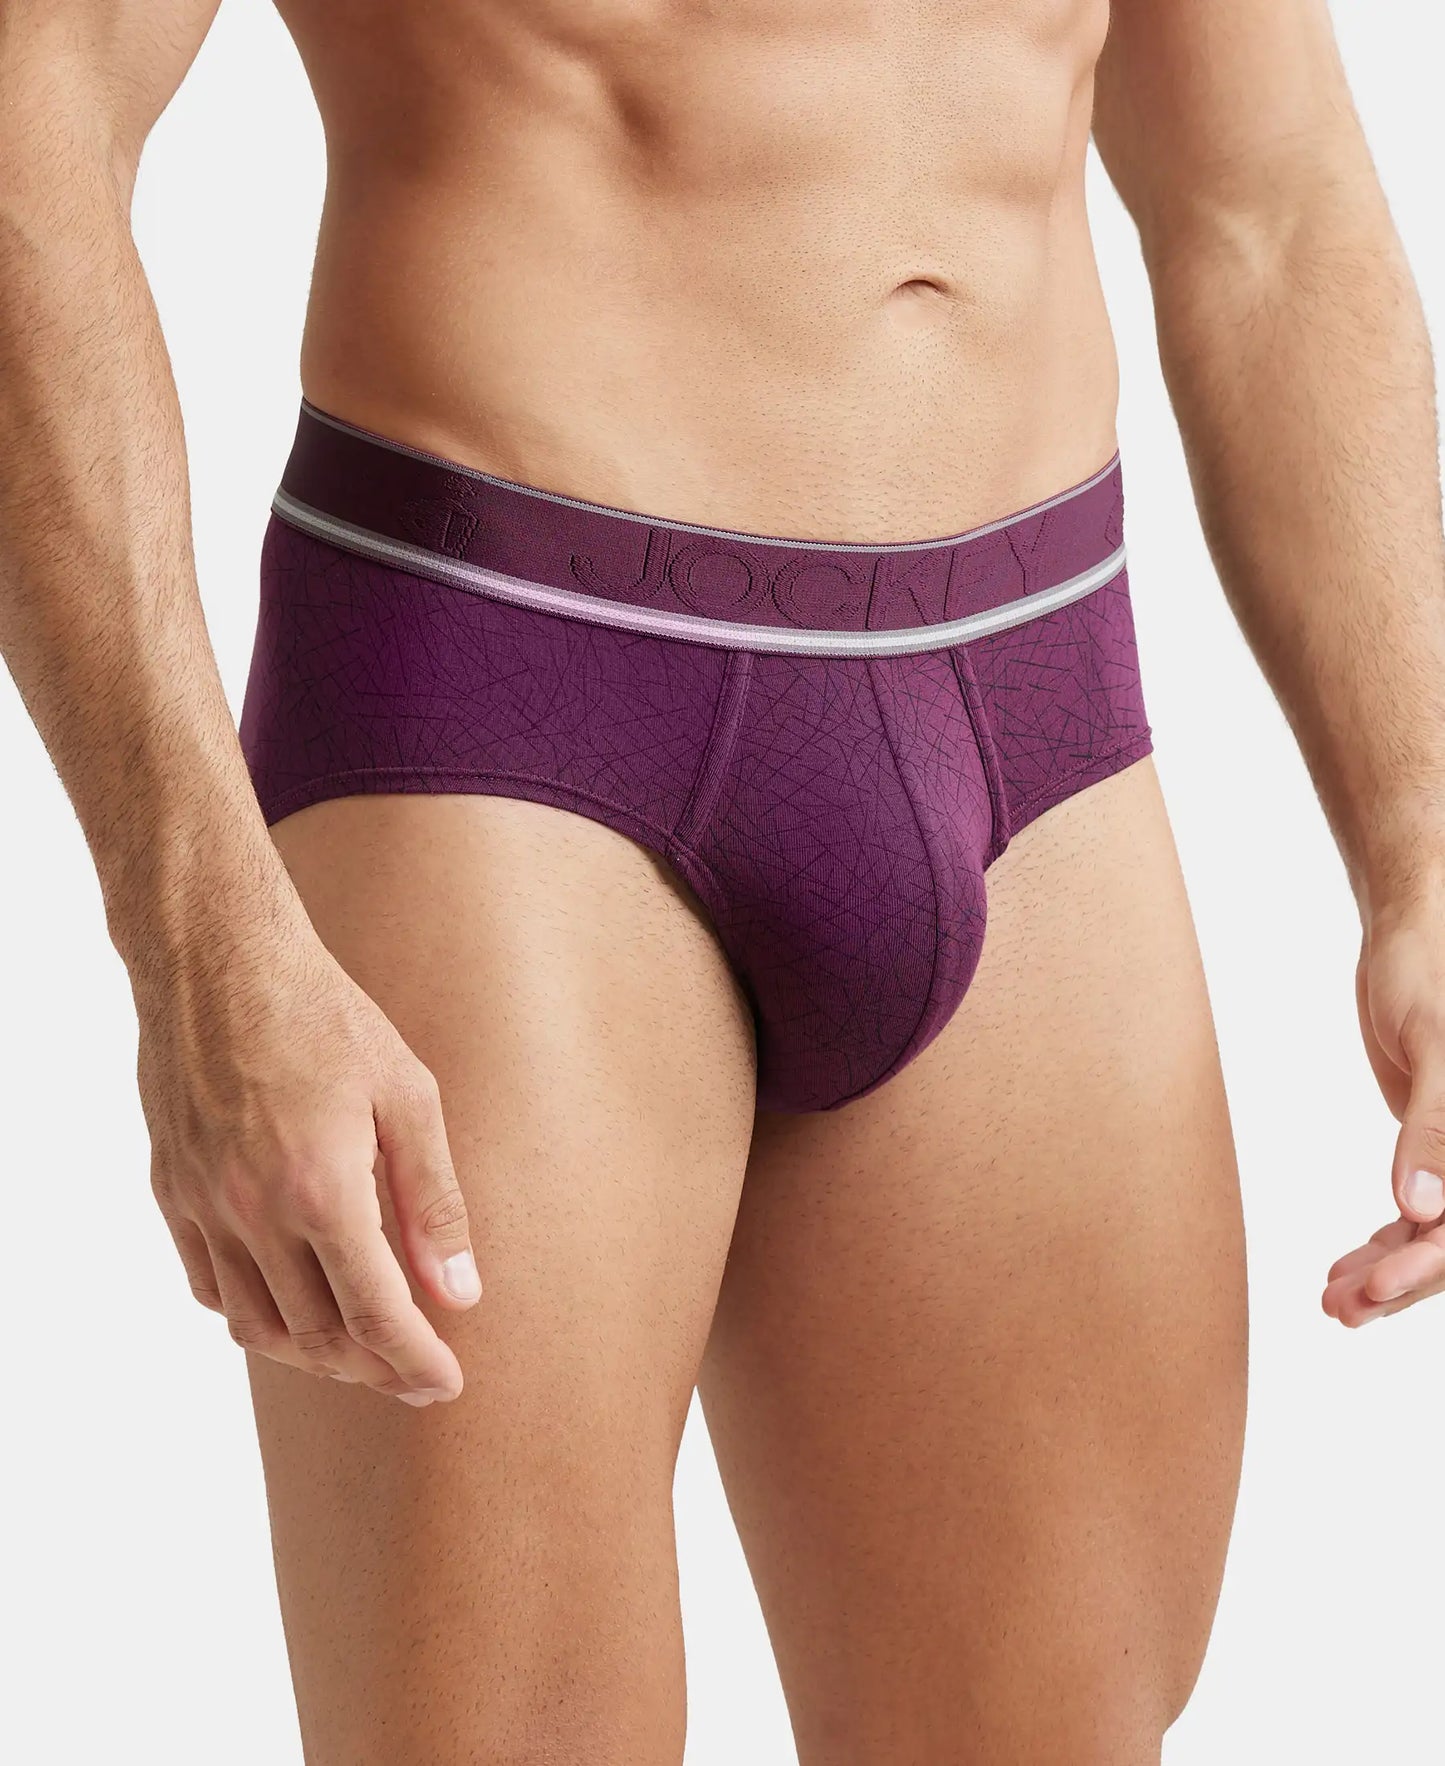 Tencel Micro Modal Elastane Printed Brief with Natural StayFresh Properties - Potent Purple-2